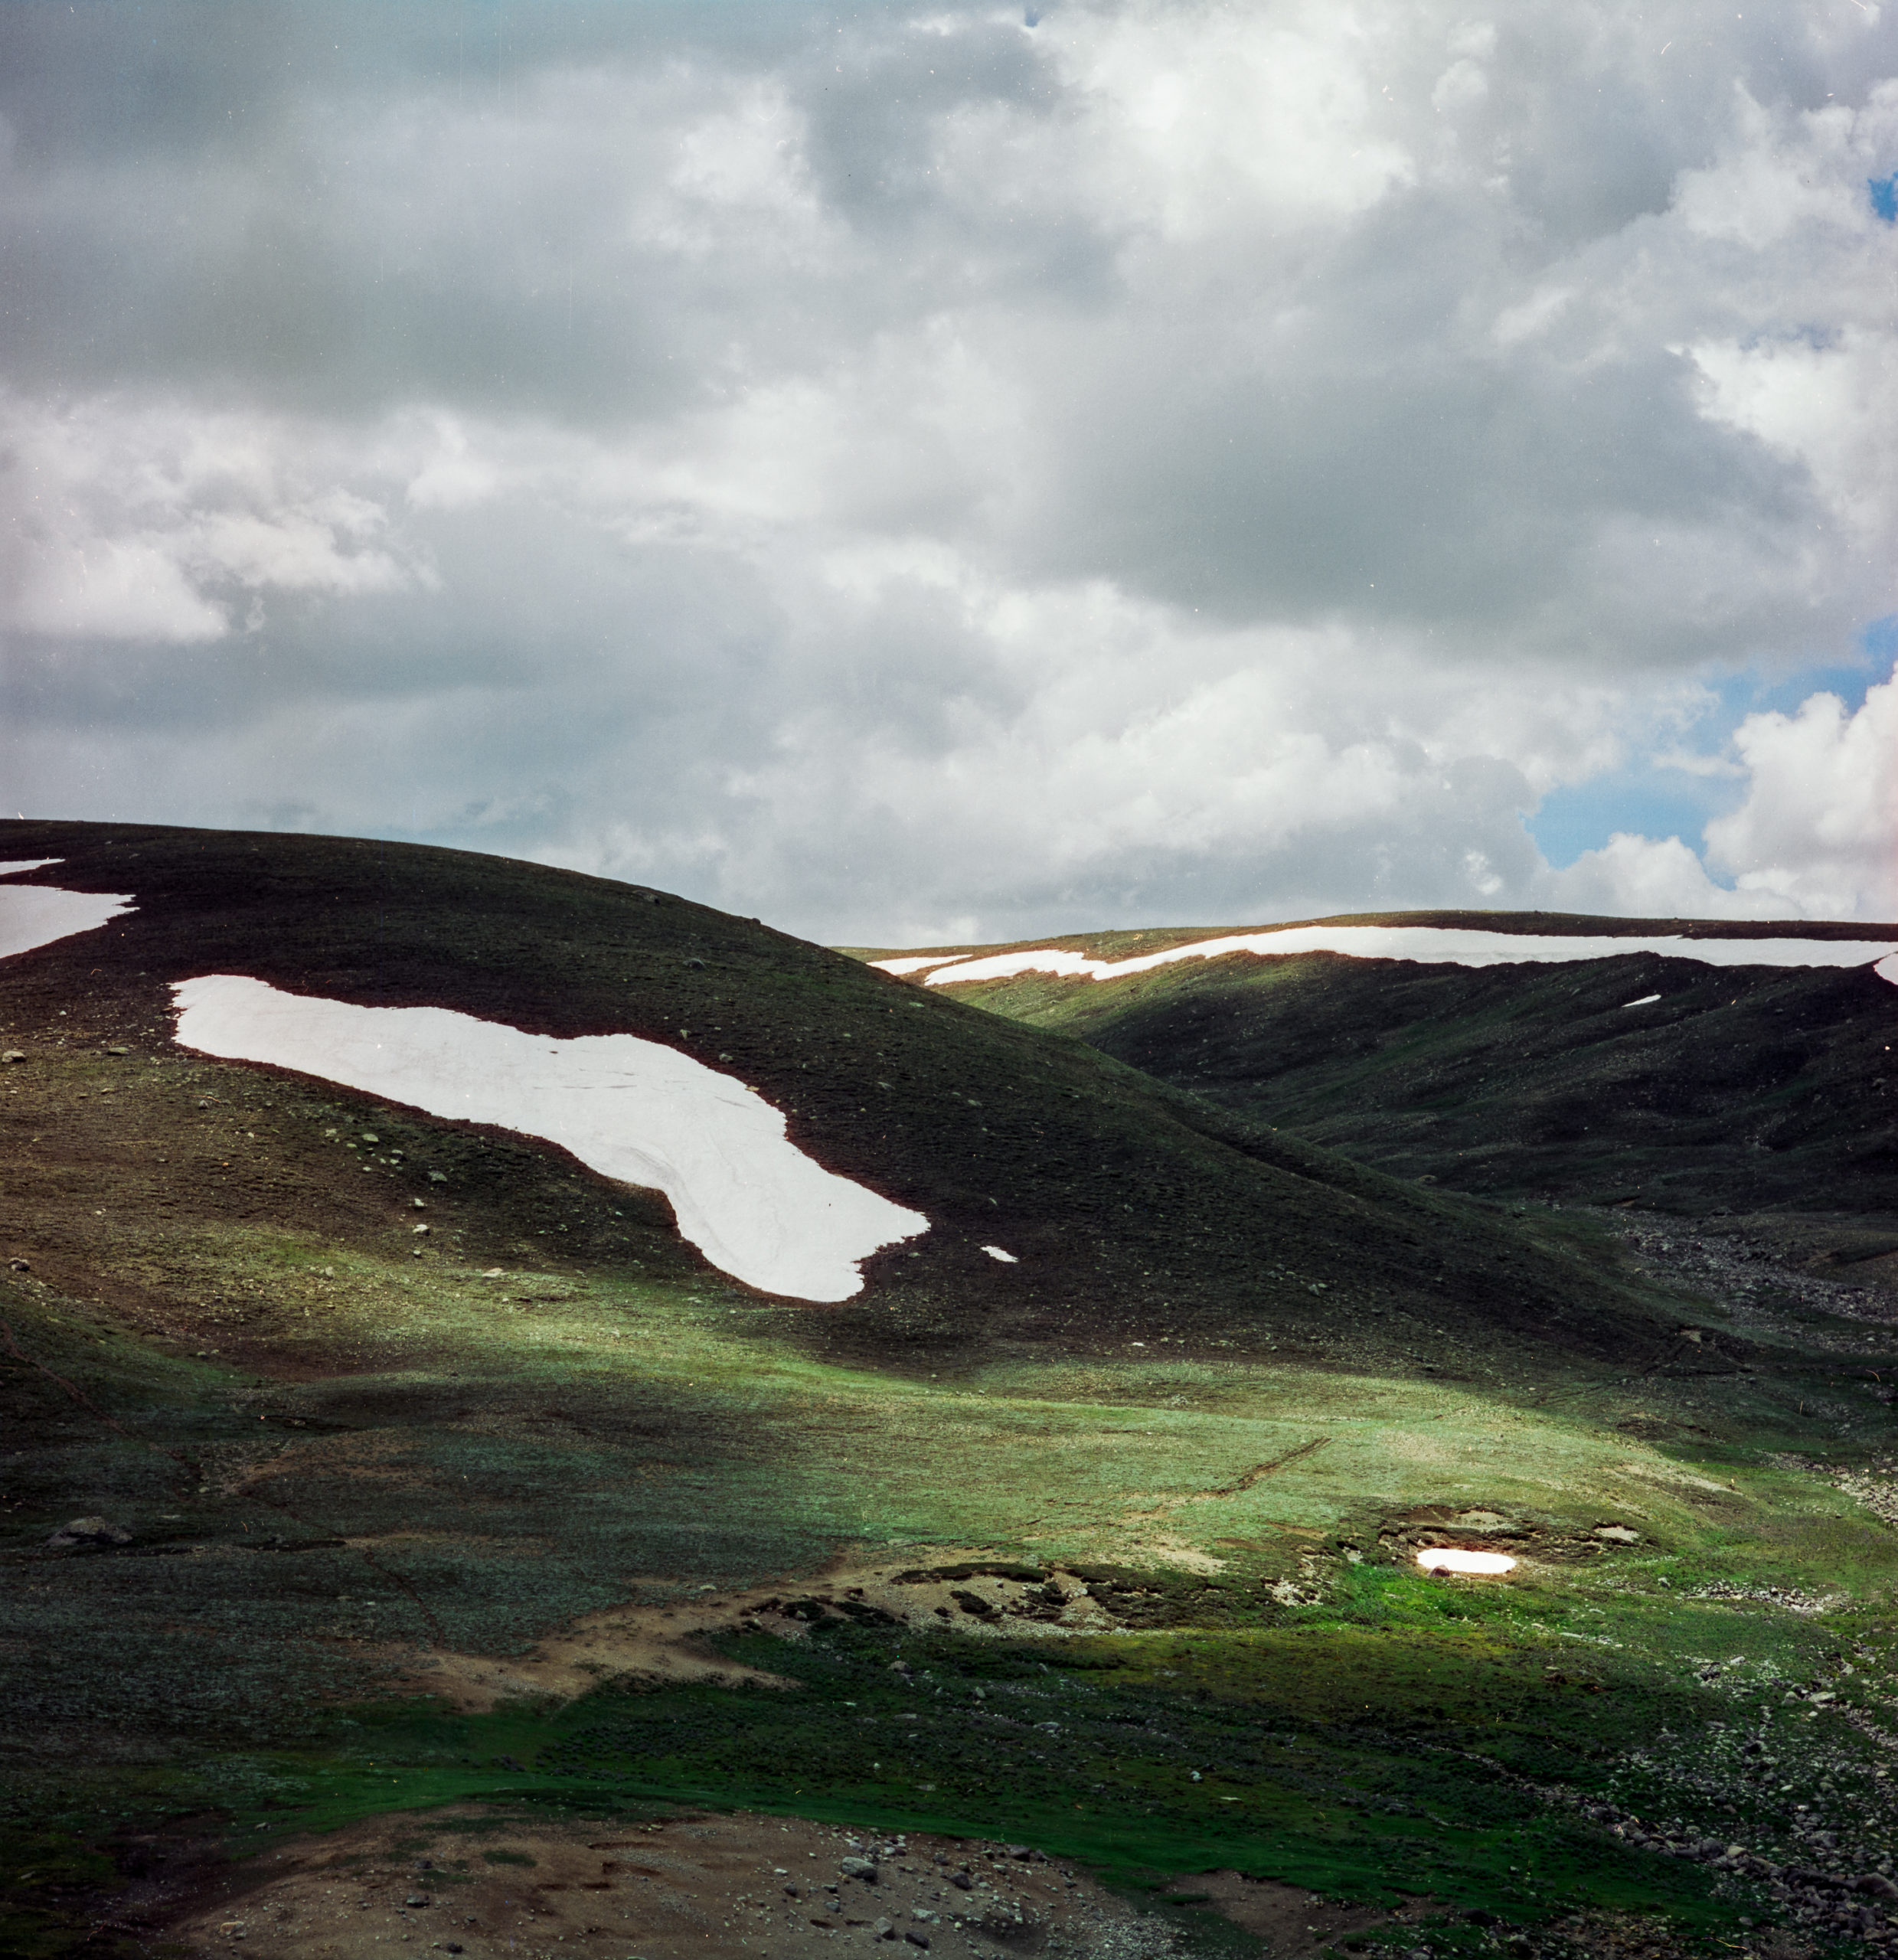 Green hills with dramatic lighting in Deosai National park